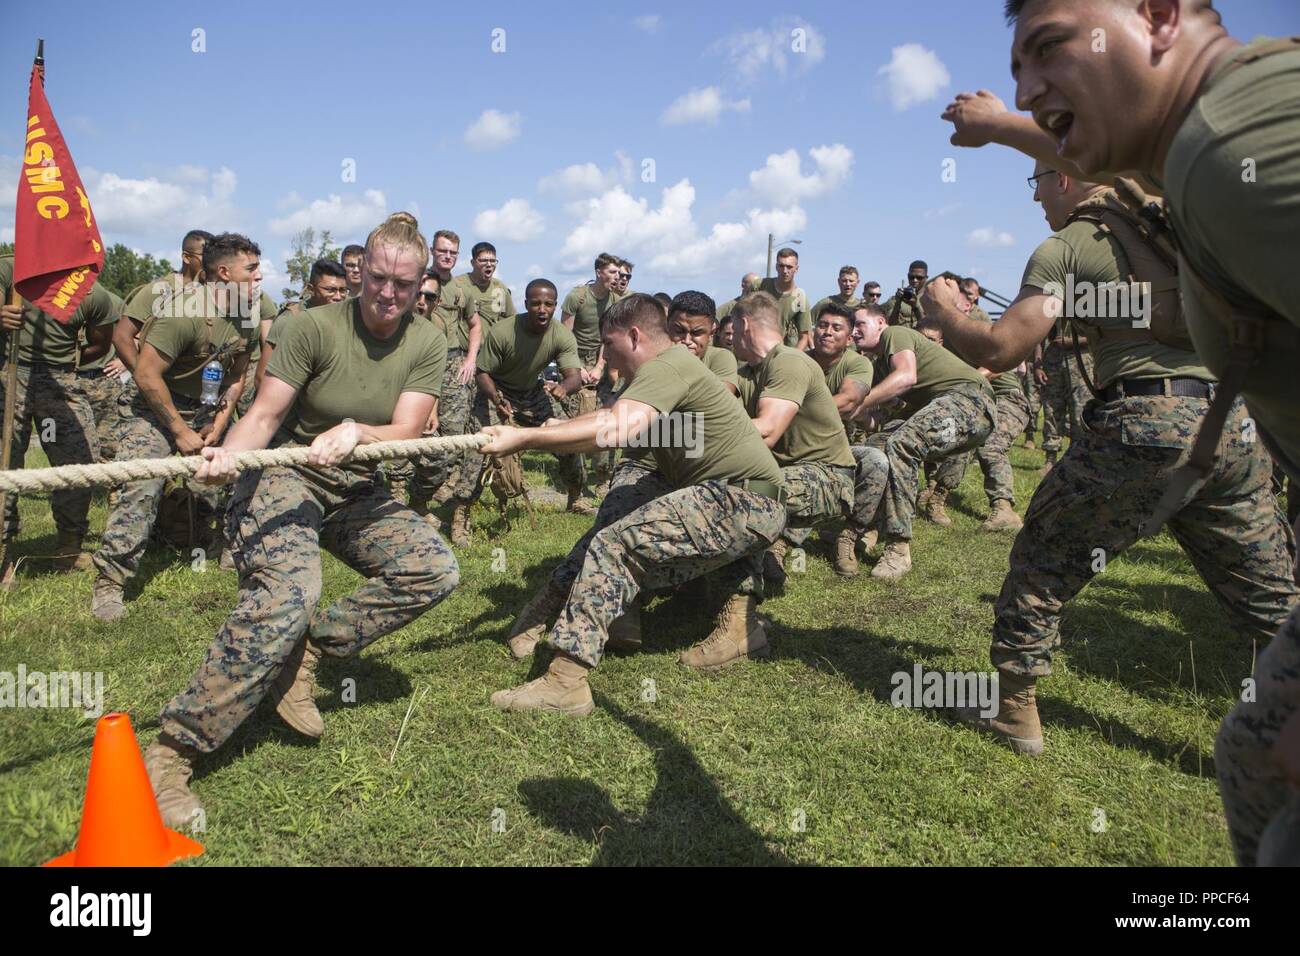 U.S. Marines with Marine Wing Communications Squadron (MWCS) 28, compete in a tug of war contest during the Spartan Cup at Marine Corps Air Station Cherry Point, N.C., Aug. 17, 2018. MWCS-28 conducts a semiannual Spartan Cup to raise moral and improve unit cohesion. MWCS-28 is with Marine Air Control Group 28, 2nd Marine Aircraft Wing. Stock Photo